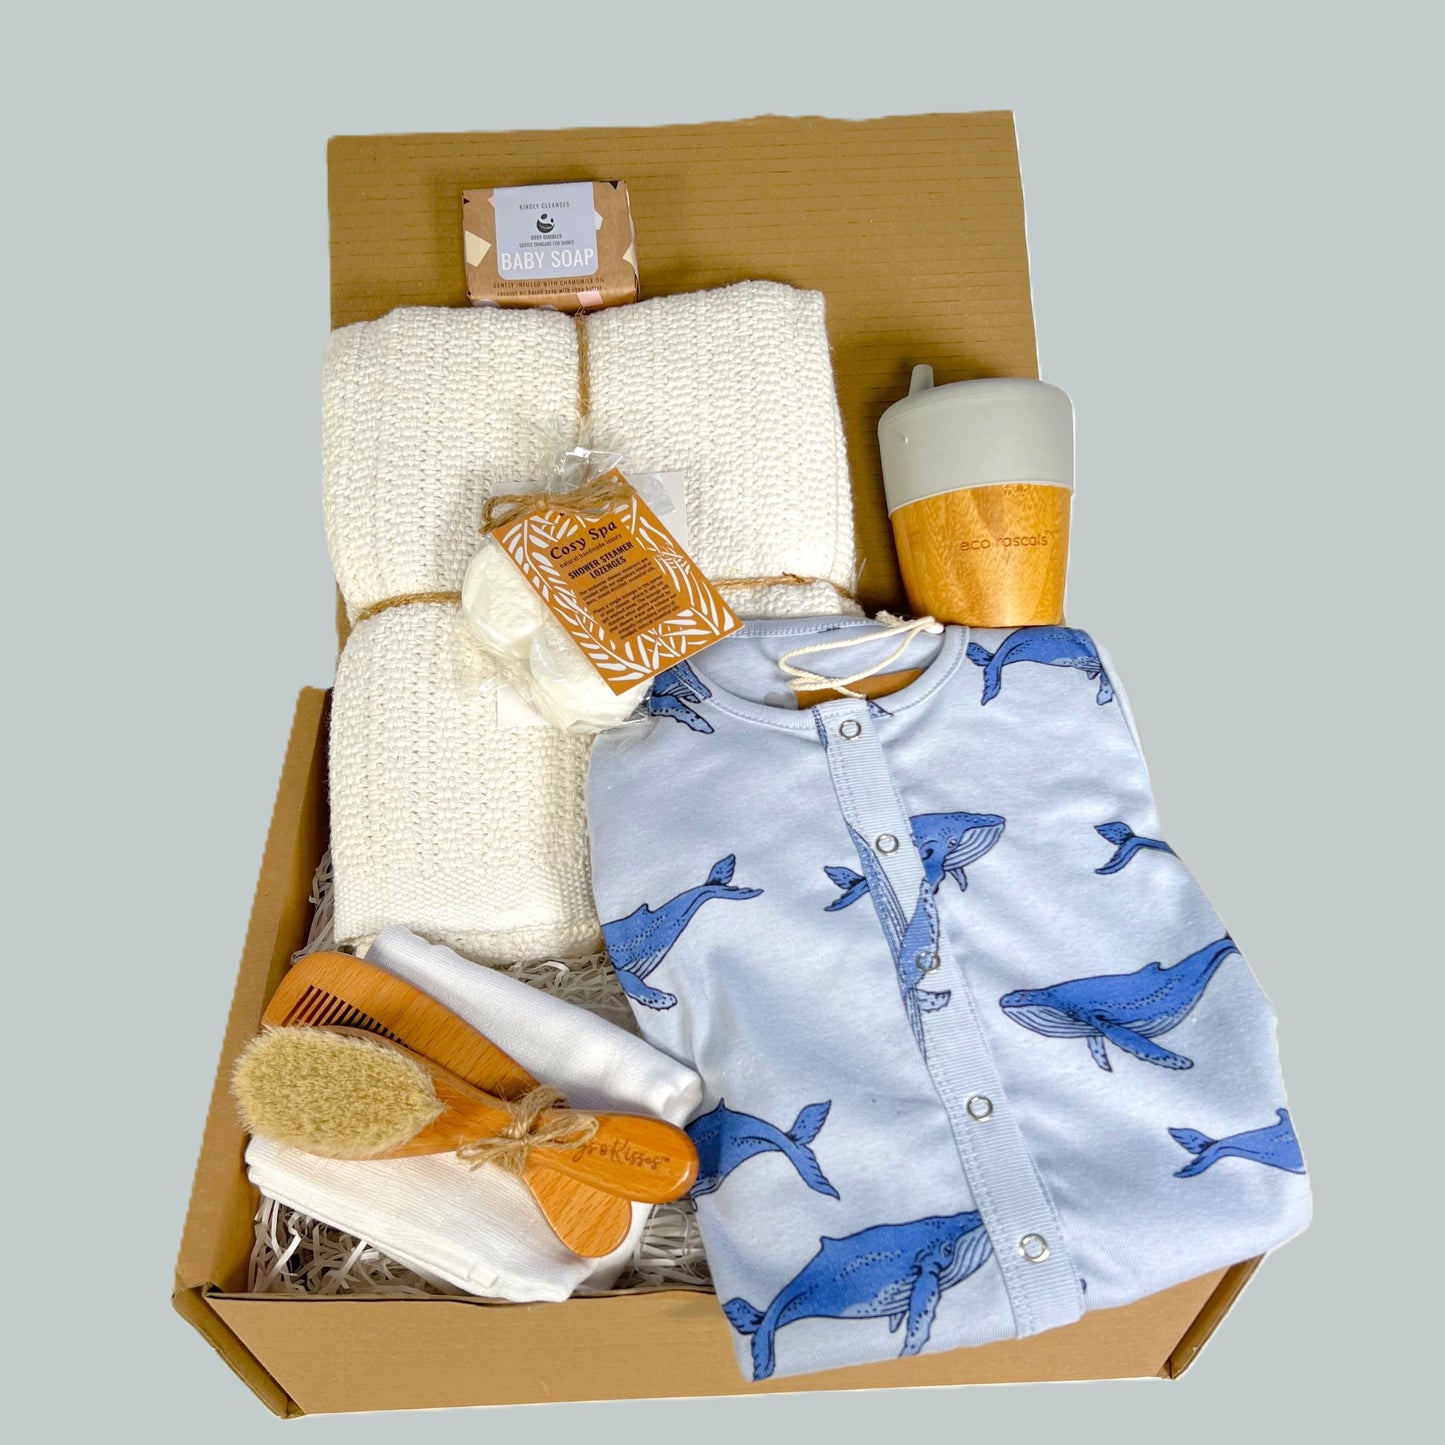 This eco friendly new parents gift has a GOTS certified blue whale print baby romper, a white  cotton cellular baby blanket, a bamboo sippy cup by Eco Rascals, a wooden baby brush and comb set, a white muslin square and a pack of spa steamers with refined essential oils.